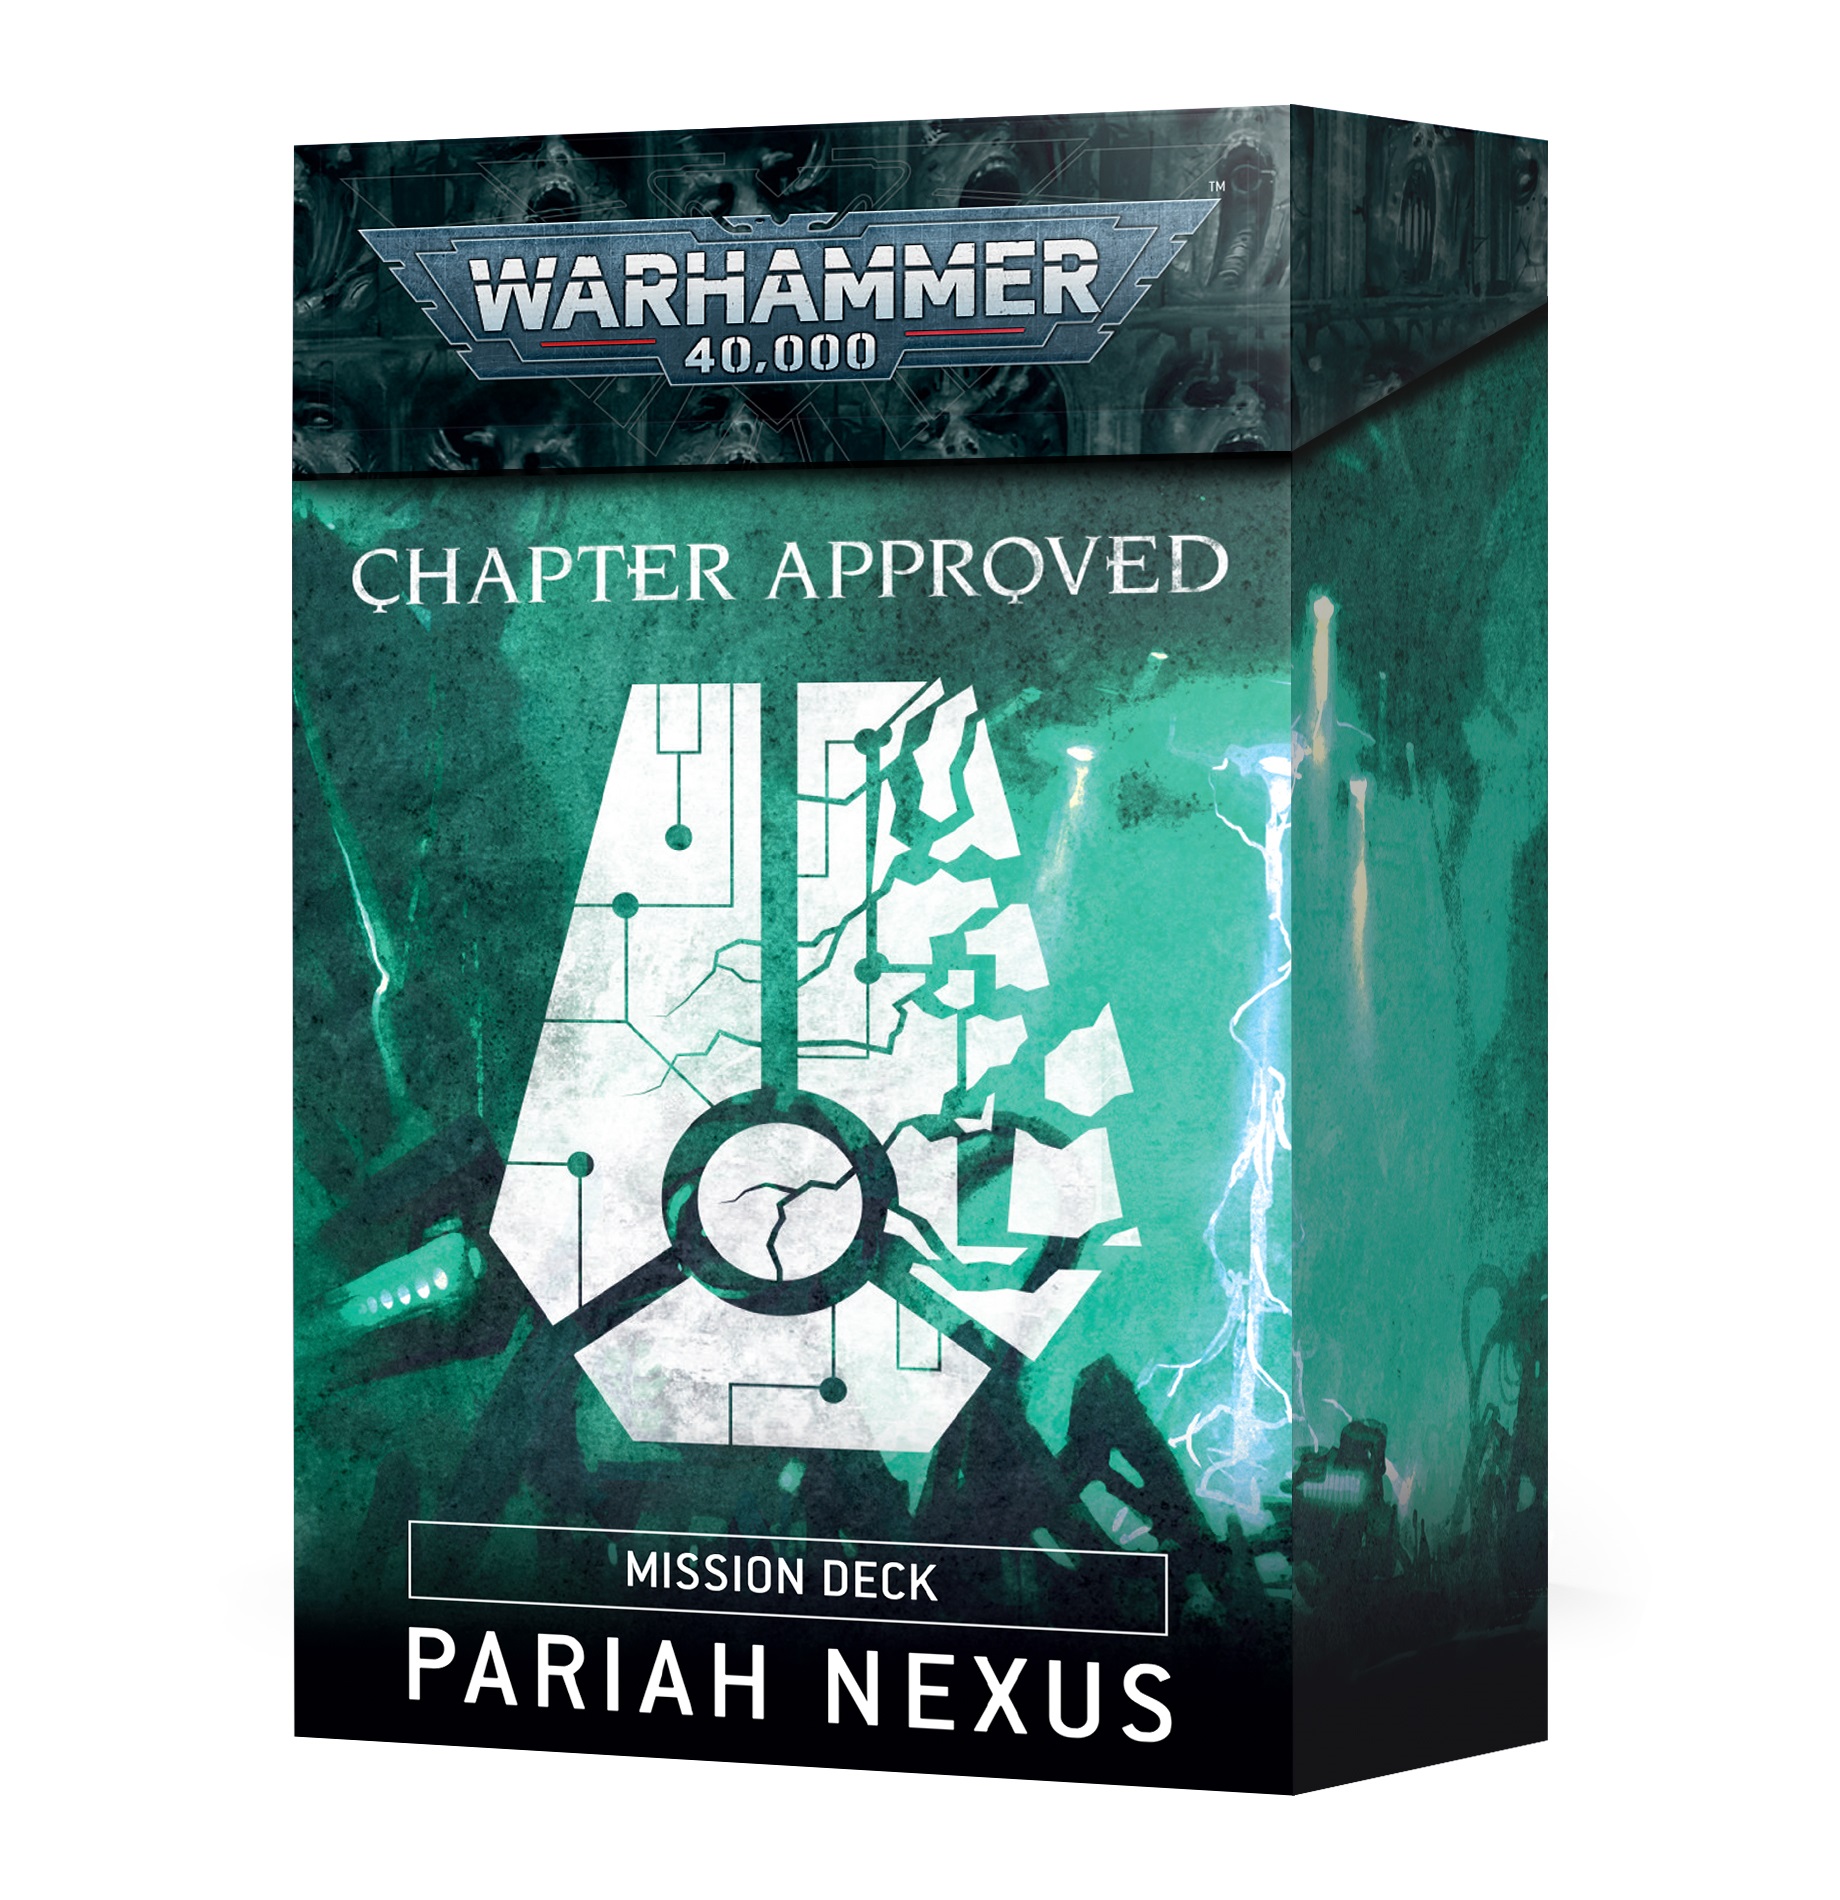 Chapter Approved - Pariah Nexus Mission Deck